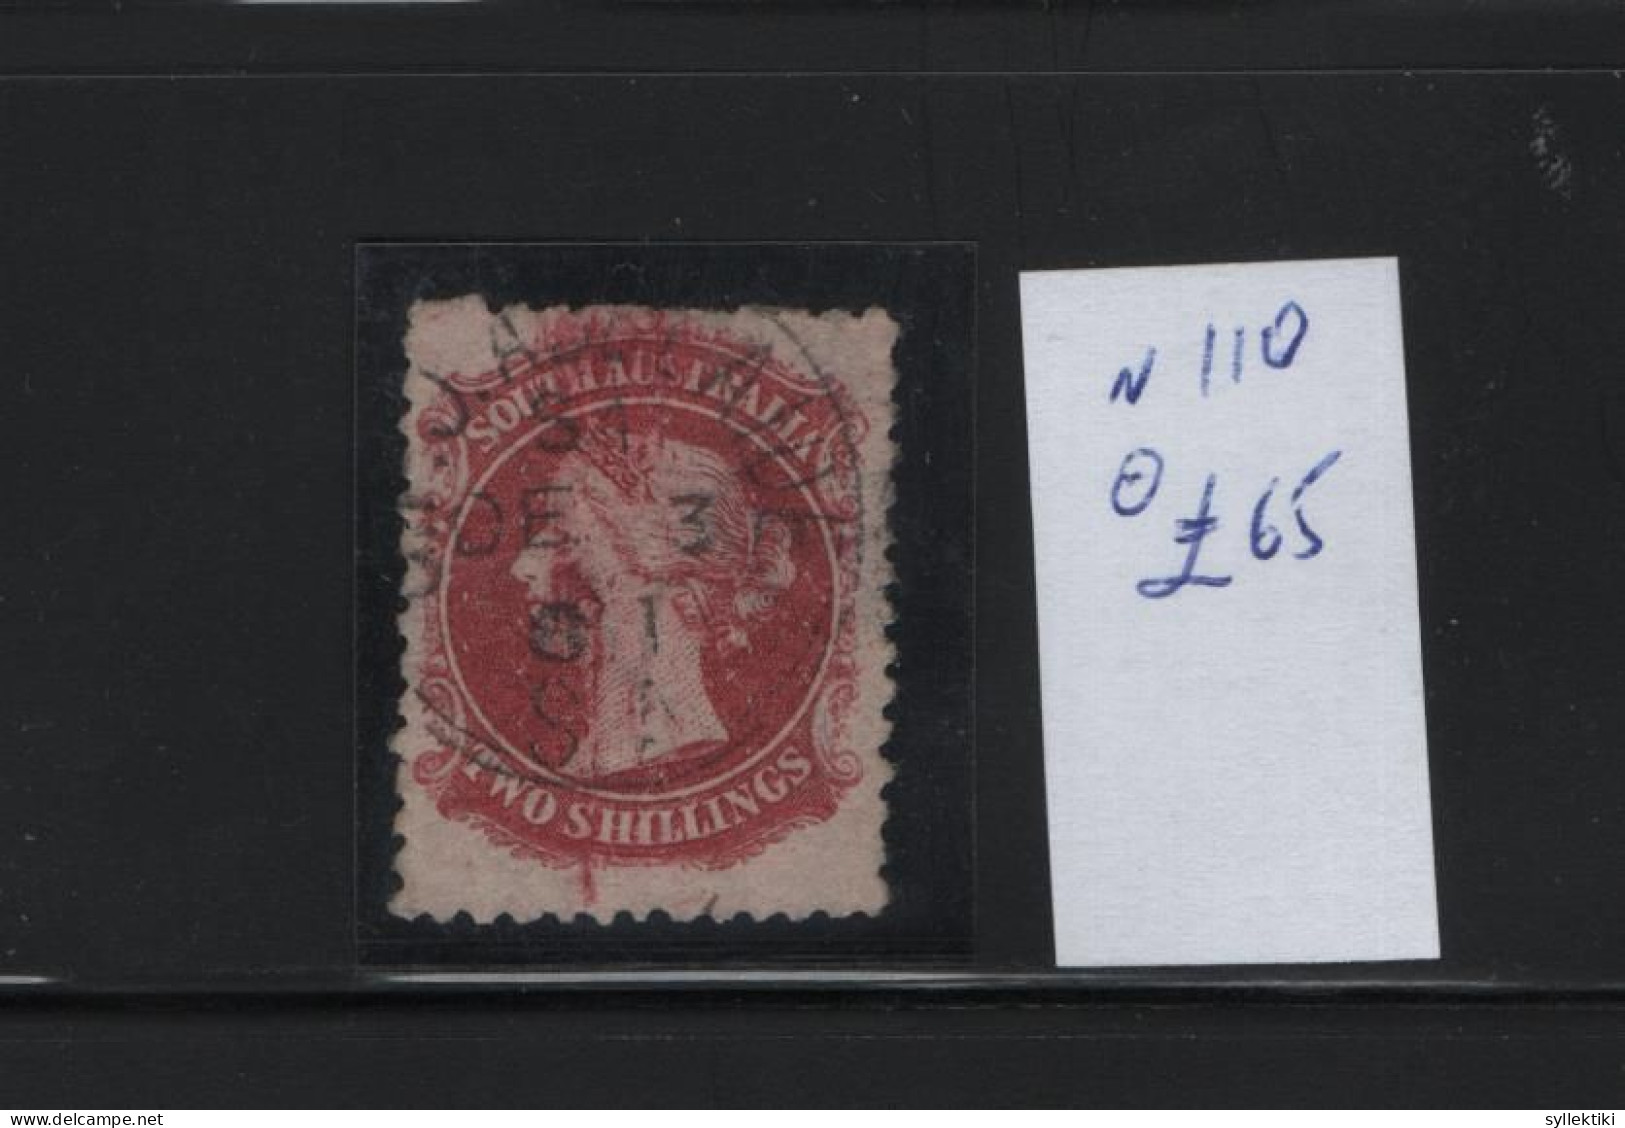 SOUTH AUSTRALIA  1870/73 2 SHILLINGS USED STAMP   STANLEY GIBBONS No 110 AND VALUE GBP 65.00 - Usati